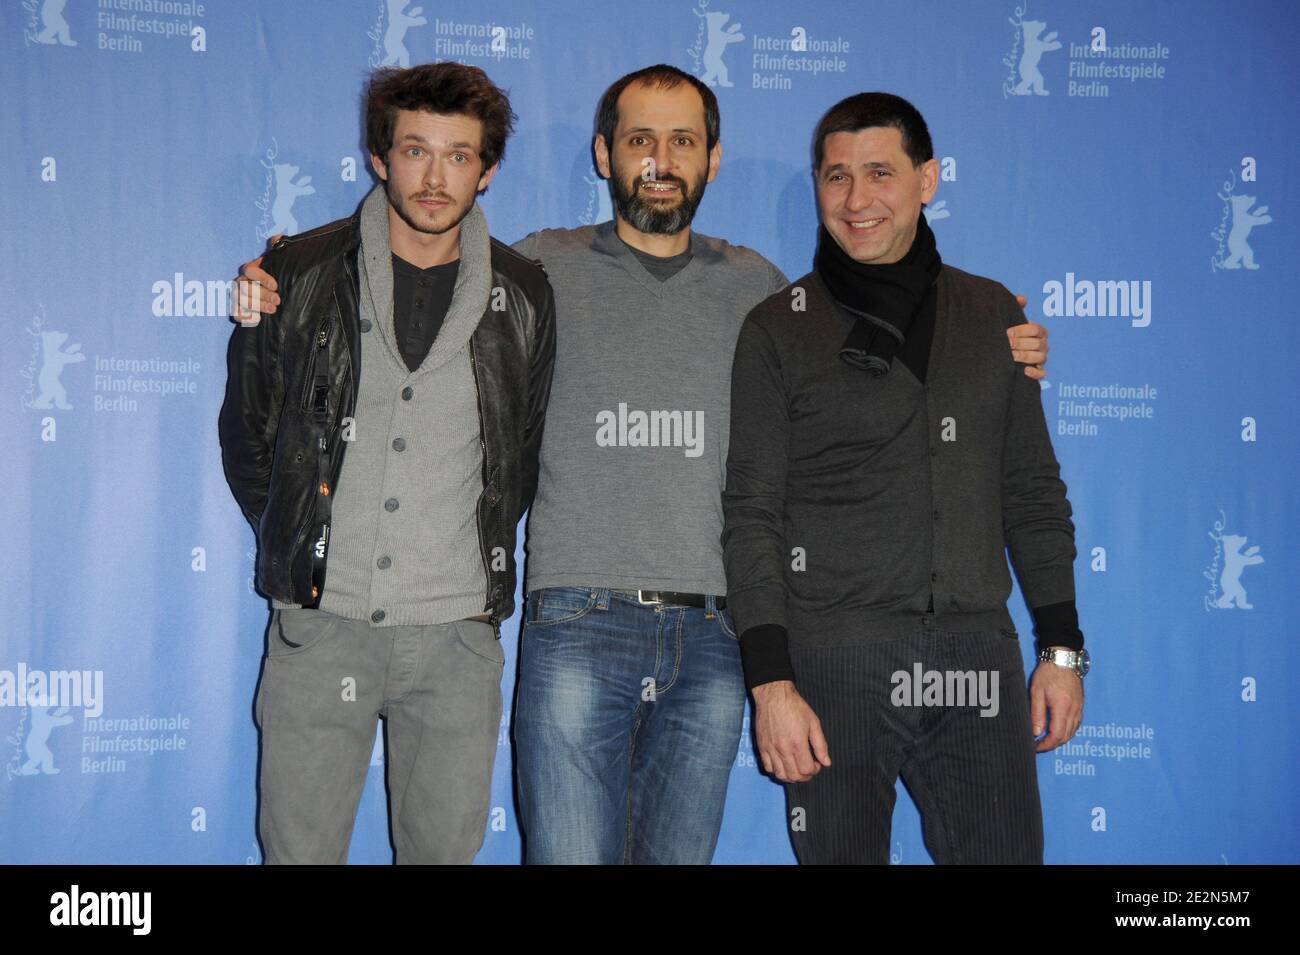 Grigory Dobrygin, Alexei Popogrebsky and Sergei Puskepalis during a photocall for 'How i ended this summer' as part of the 60th Berlin Film Festival at the Grand Hyatt Hotel in Berlin, Germany on February 17, 2010. Photo by Nicolas Briquet/ABACAPRESS.COM Stock Photo